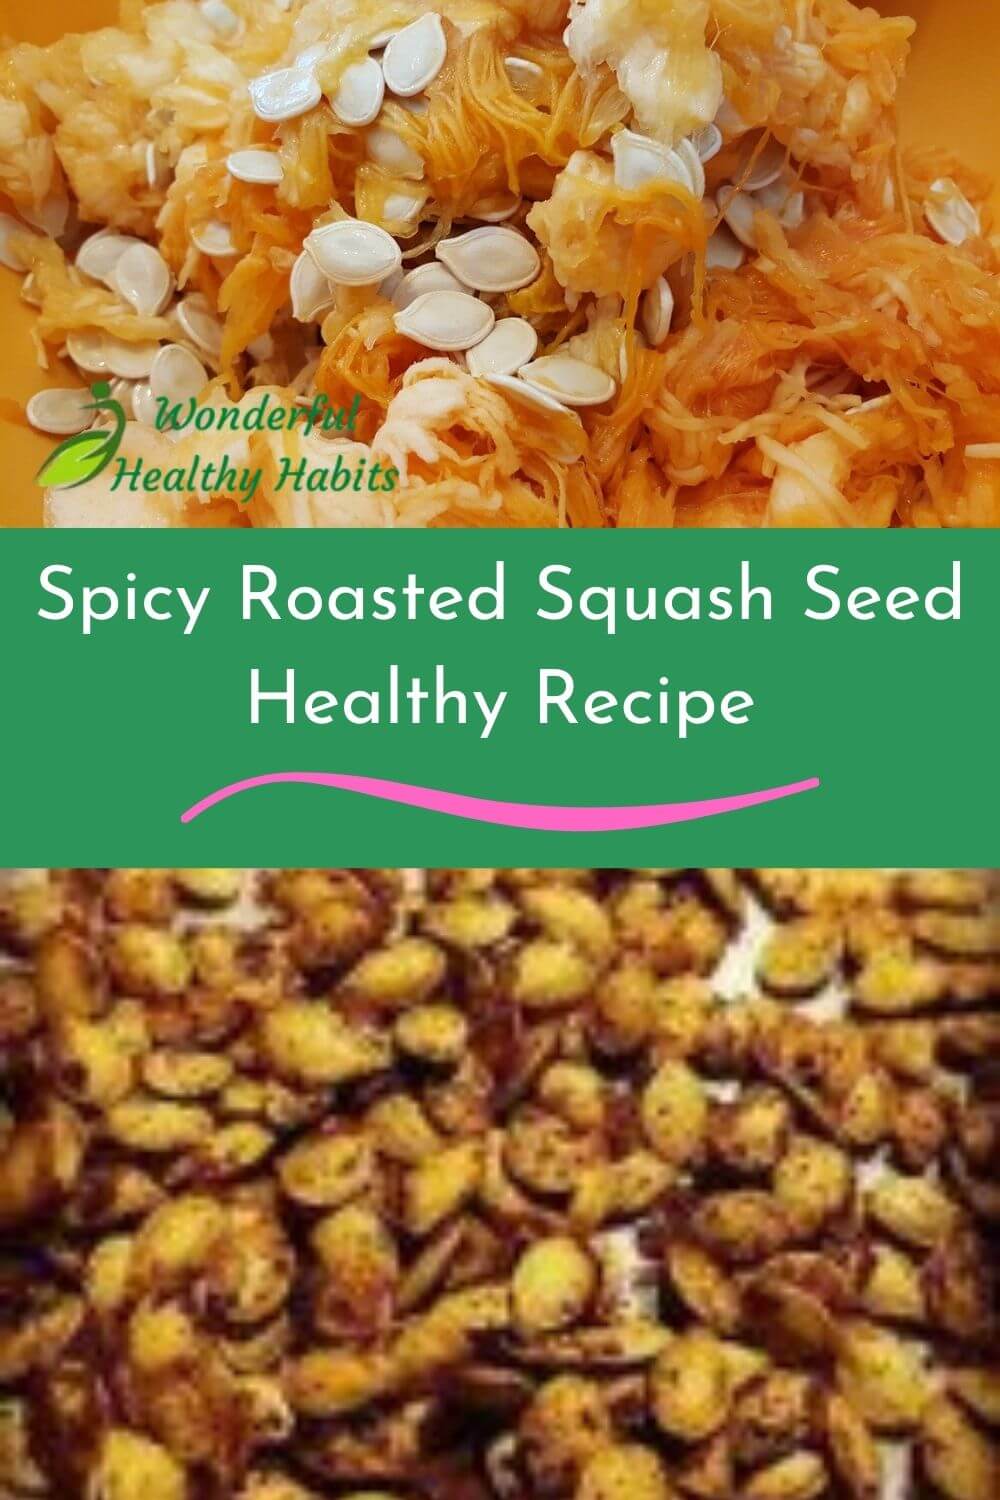 Spicy Roasted Squash Seed Recipe